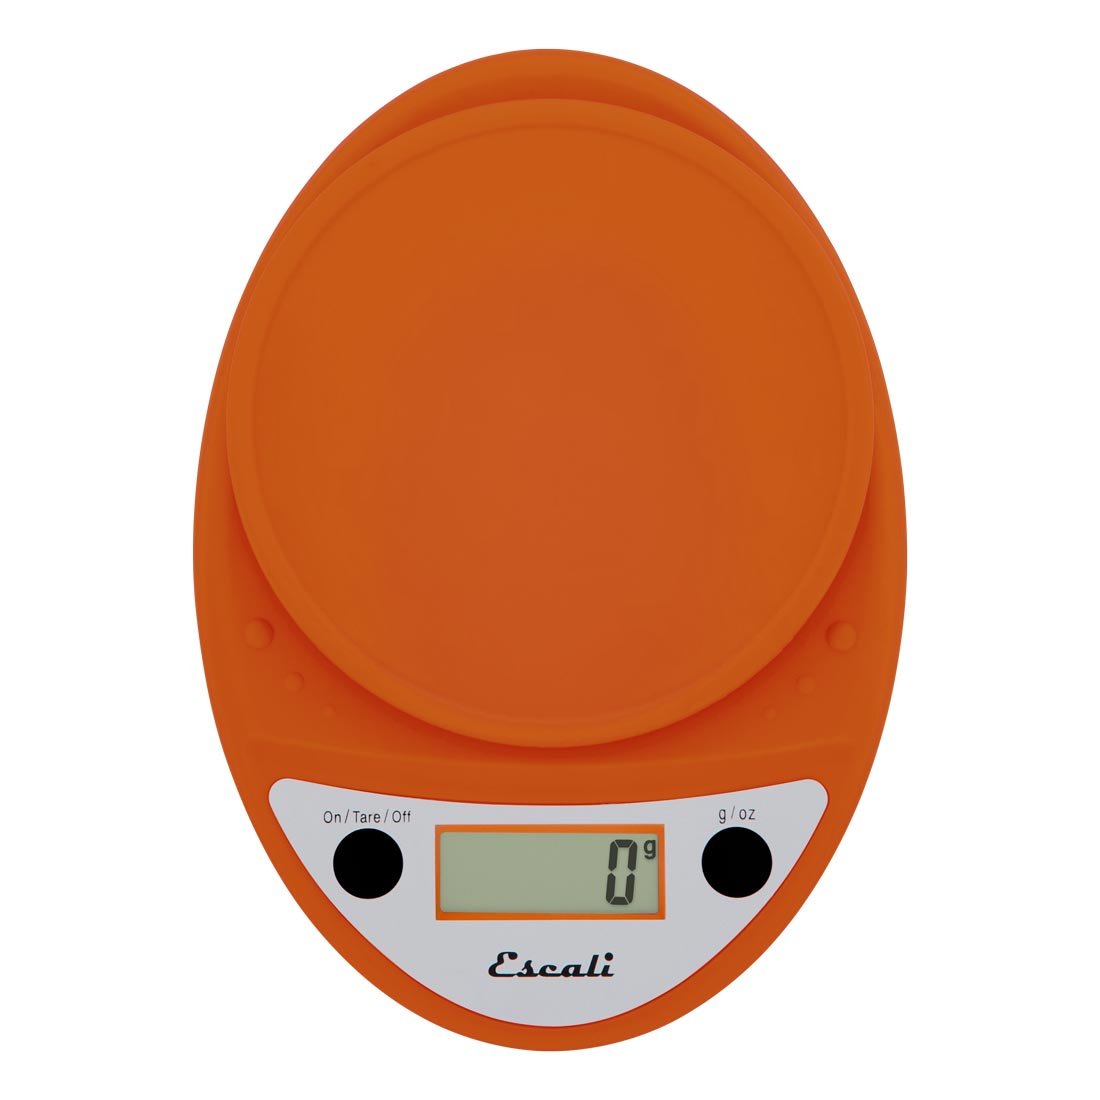 Escali Primo Digital Food Scale Multi-Functional Kitchen Scale and Baking Scale for Precise Weight Measuring and Portion Control, 8.5 x 6 x 1.5 inches, Pumpkin Orange